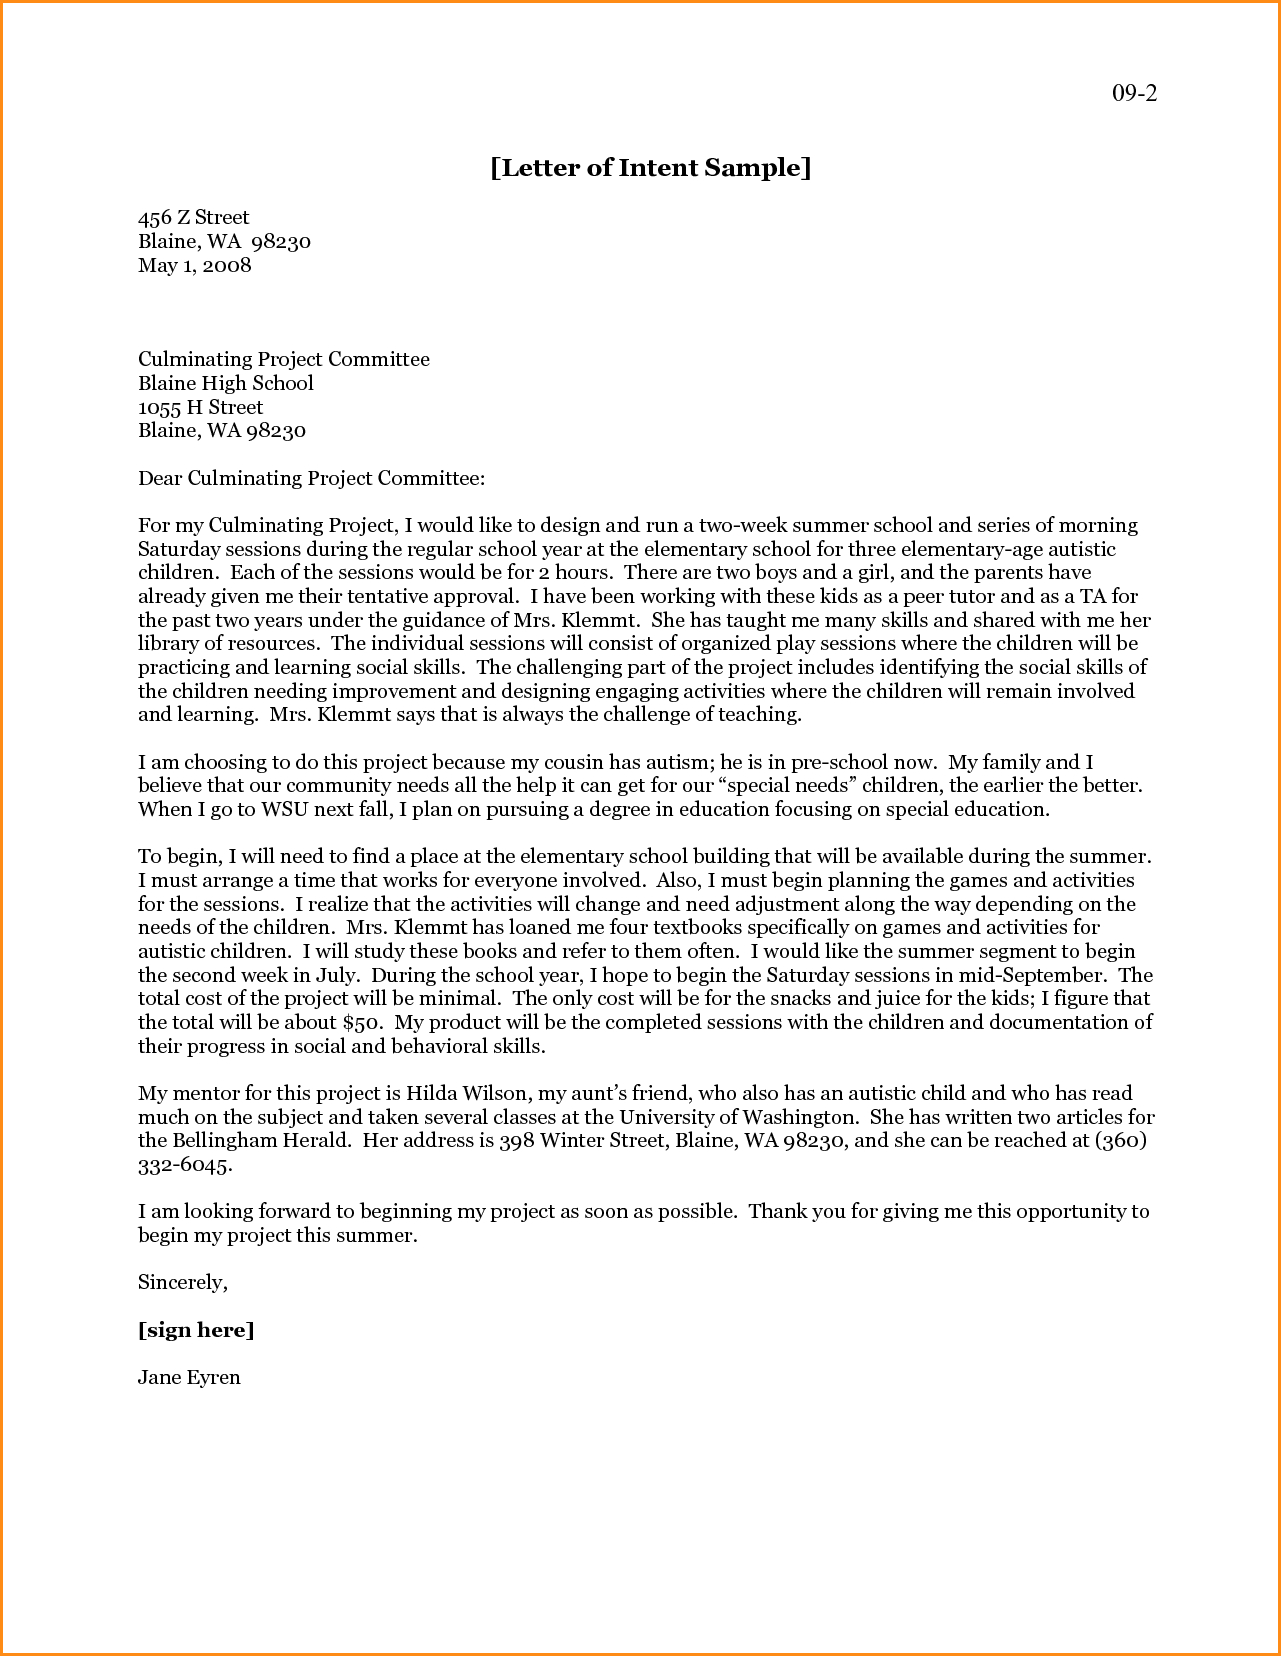 Special Needs Letter Of Intent Template - Grad School Letter Intent Sample Brilliant Ideas Phd